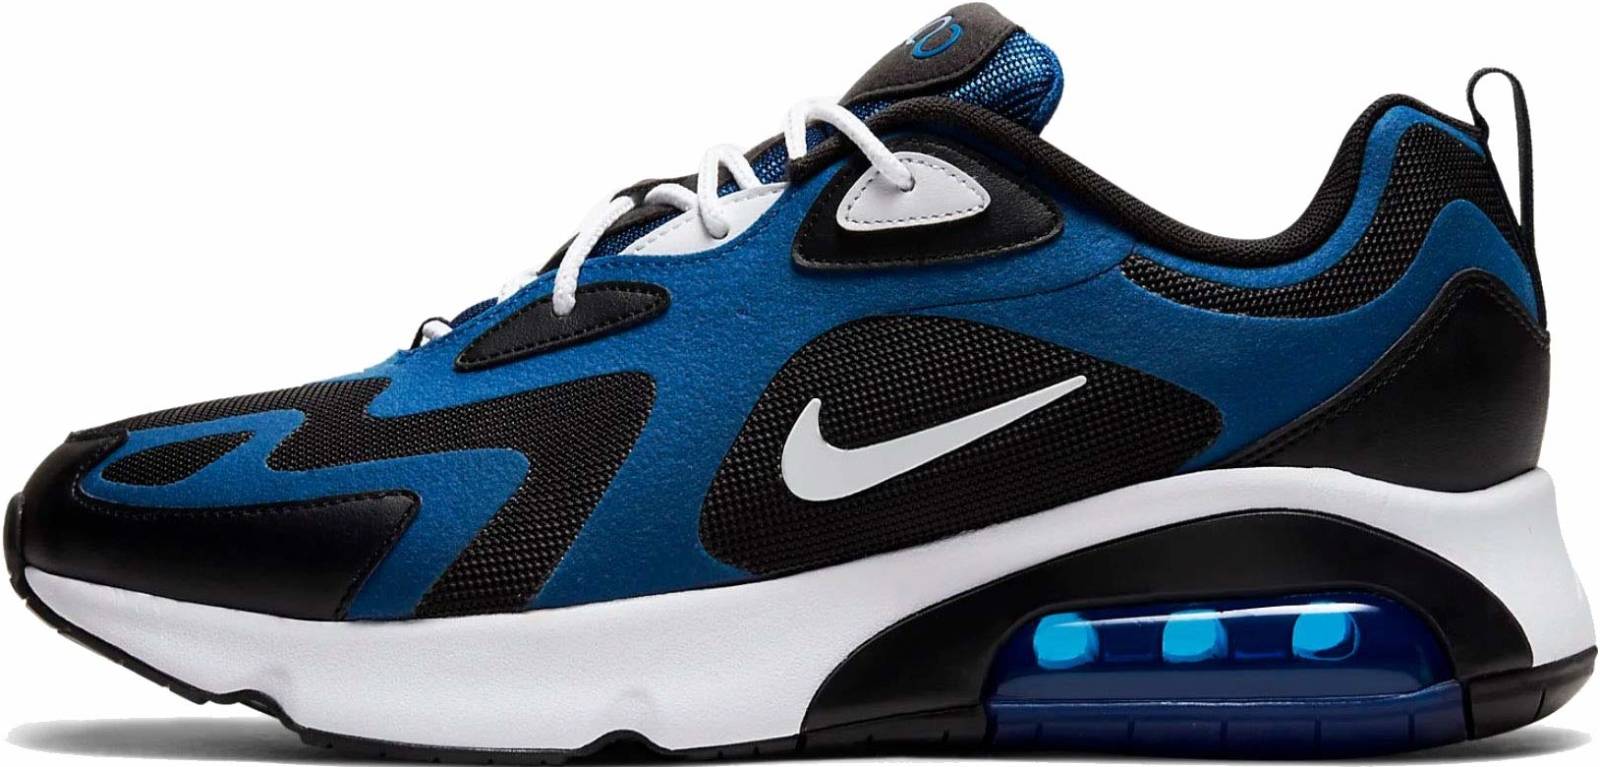 Save 38% on Blue Nike Sneakers (130 